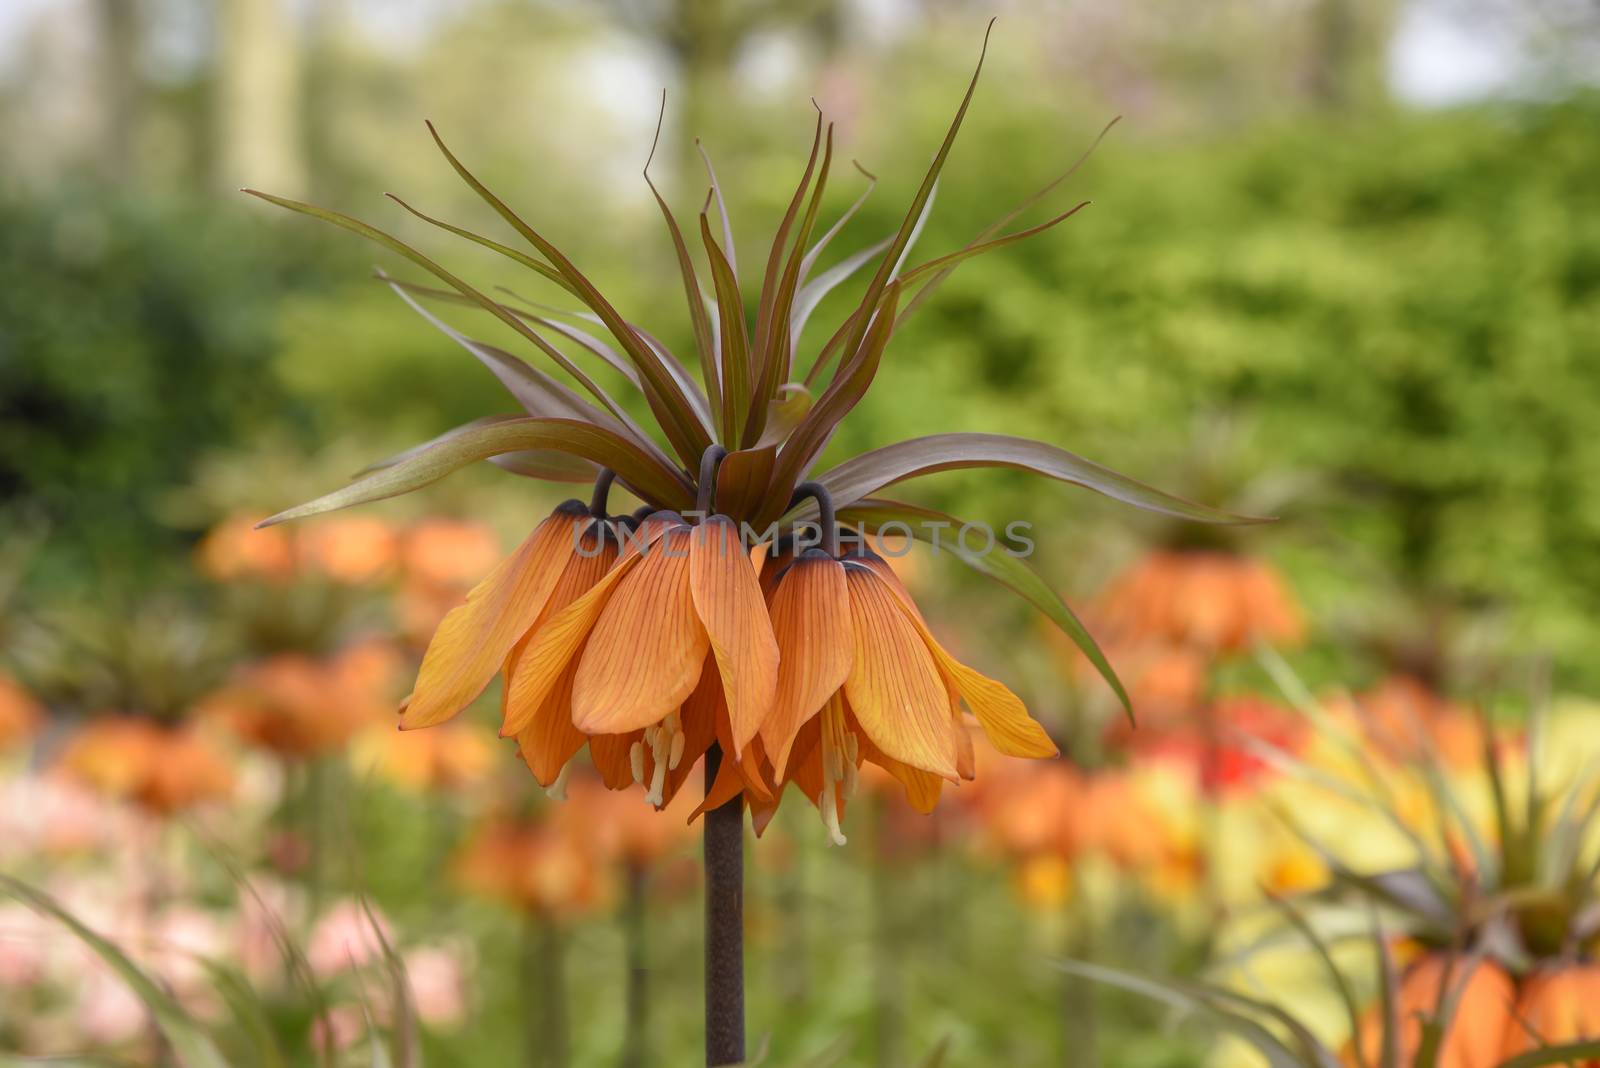 Orange Crown Imperial flowers against a blur flower background under a sunny day light